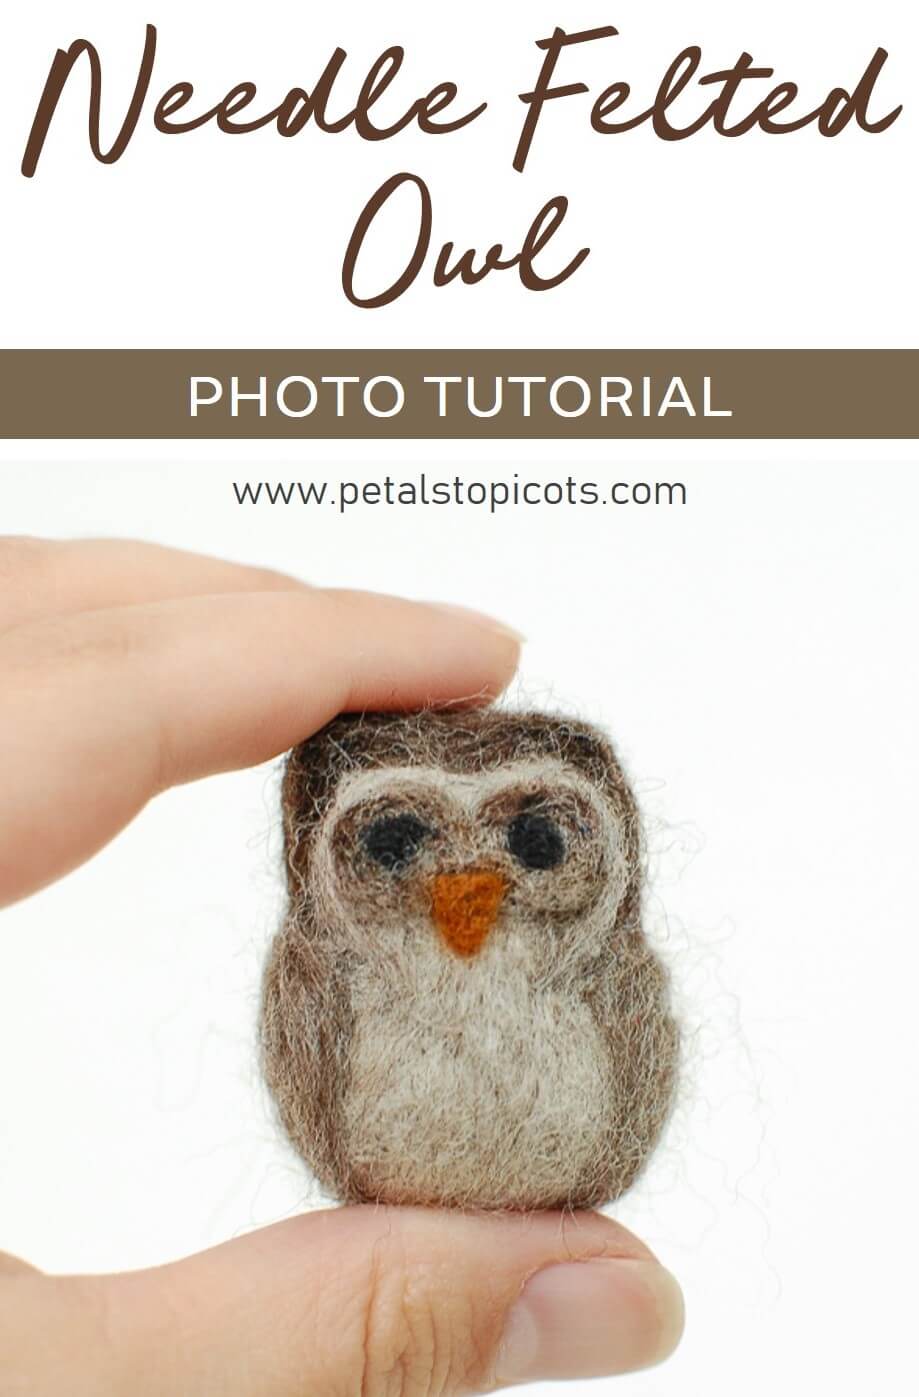 How to Make a Needle Felted Owl {Photo Tutorial}